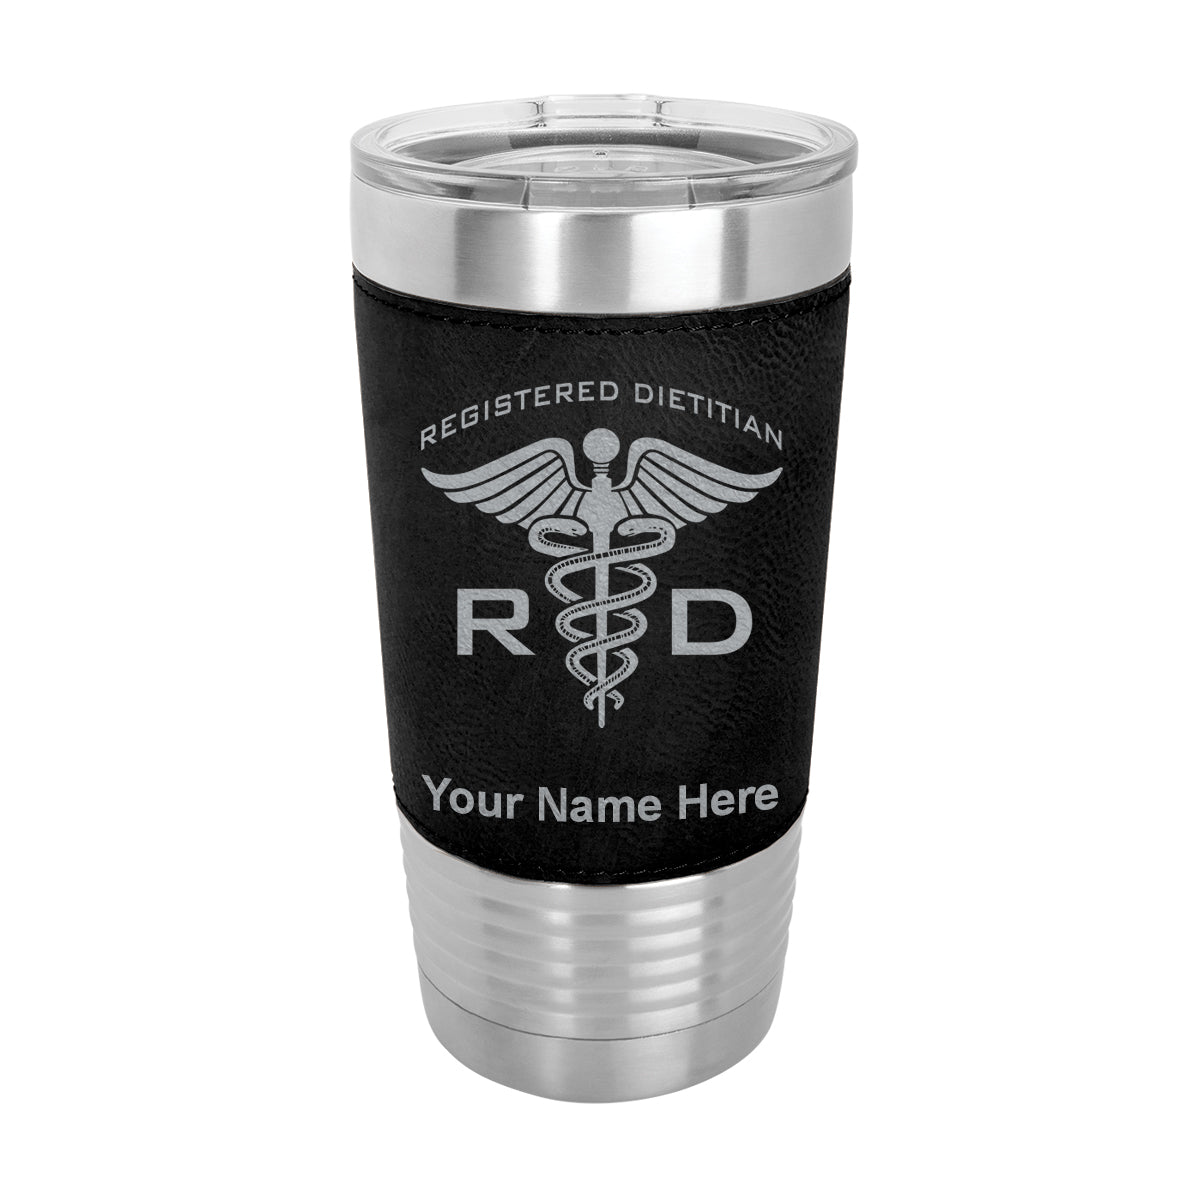 20oz Faux Leather Tumbler Mug, RD Registered Dietitian, Personalized Engraving Included - LaserGram Custom Engraved Gifts